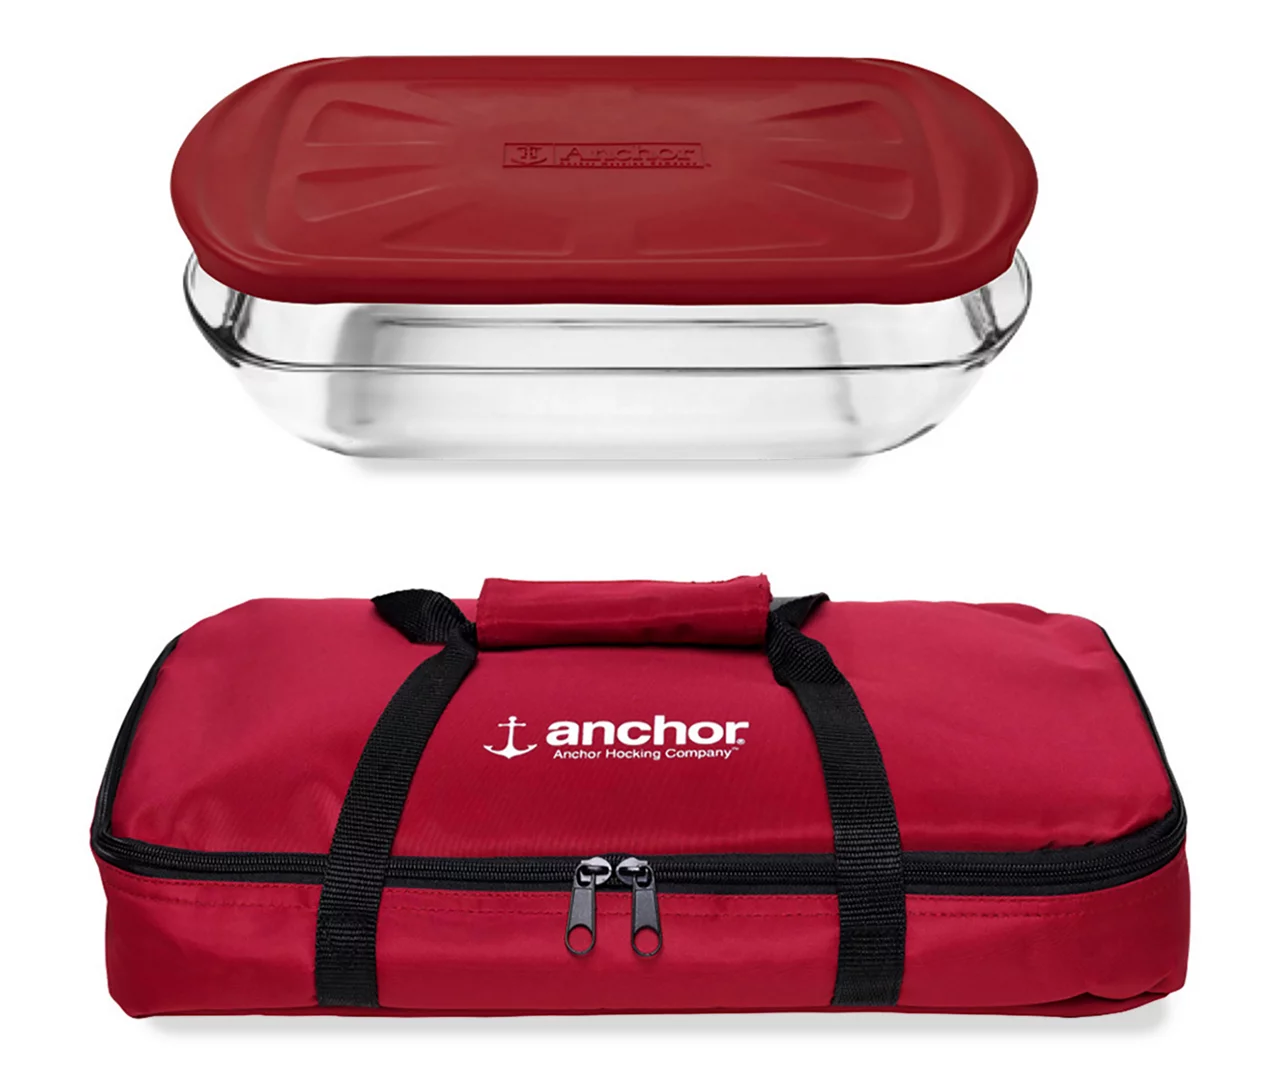 Primary image for NEW Anchor Hocking 3 PC Bake & Take Set red w/ 9x13 glass baking dish, lid & bag